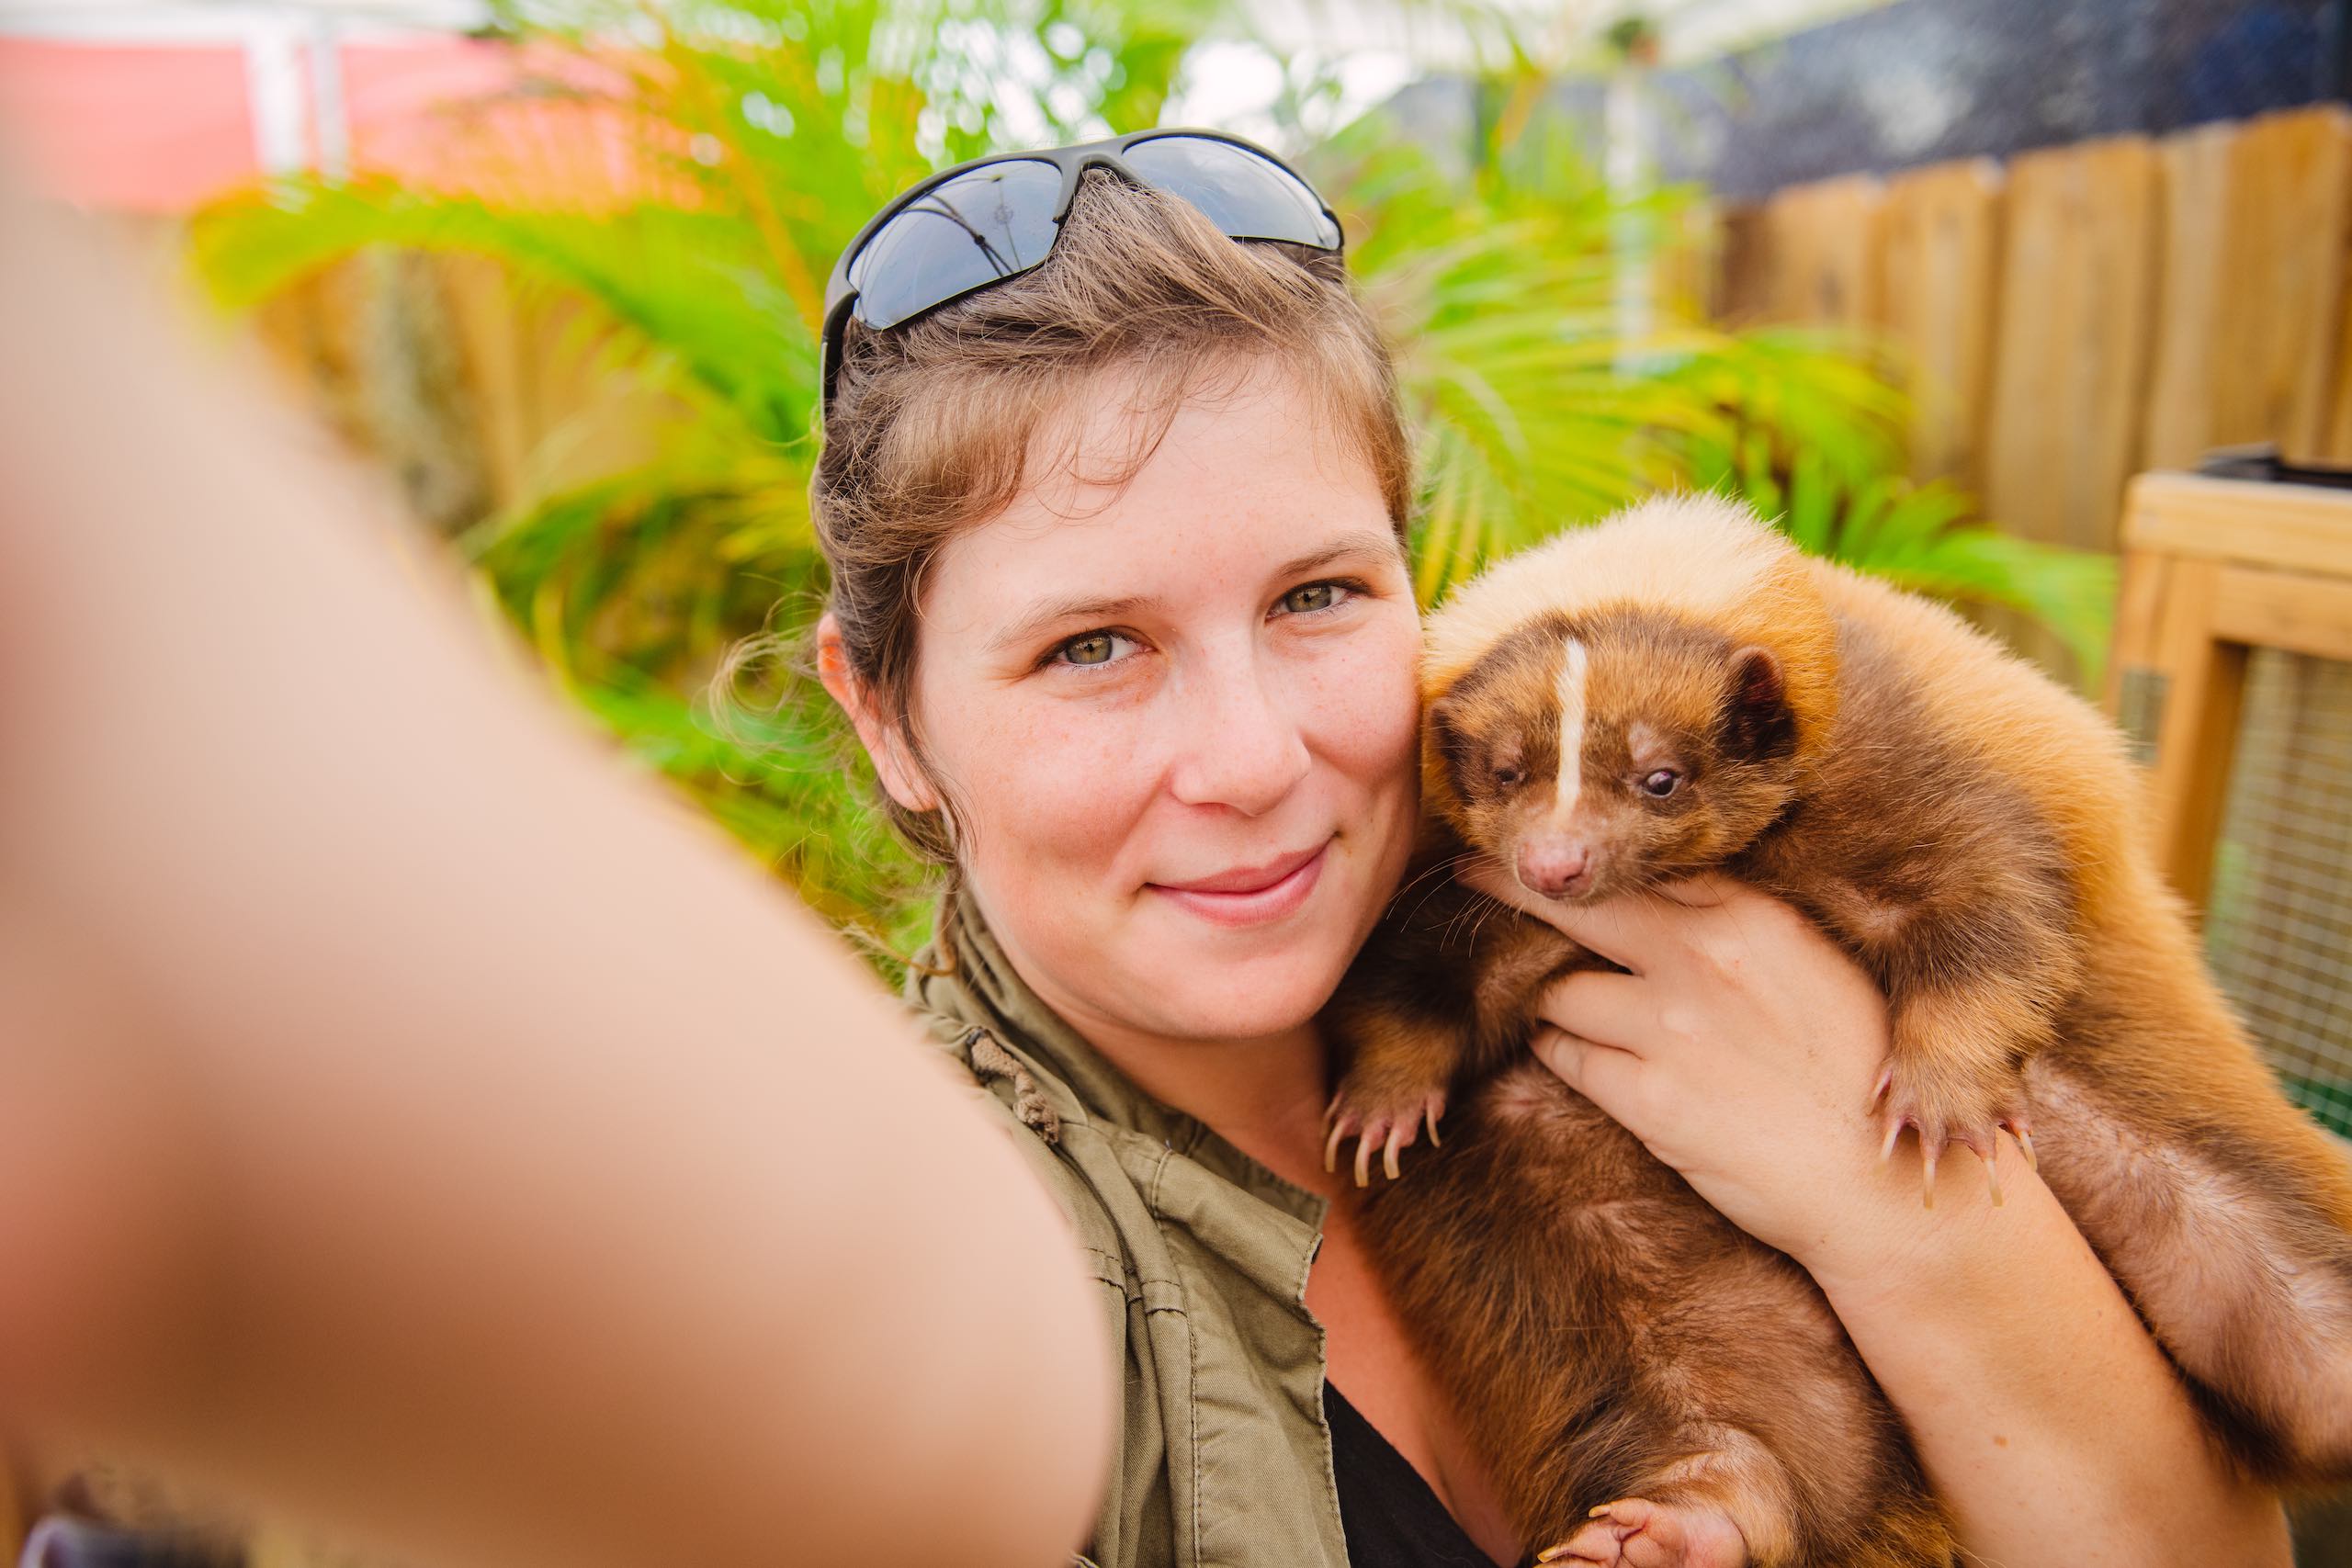 Everglades Holiday Park Closeup of selfie of woman smiling holding a skunk in her hand next to her face